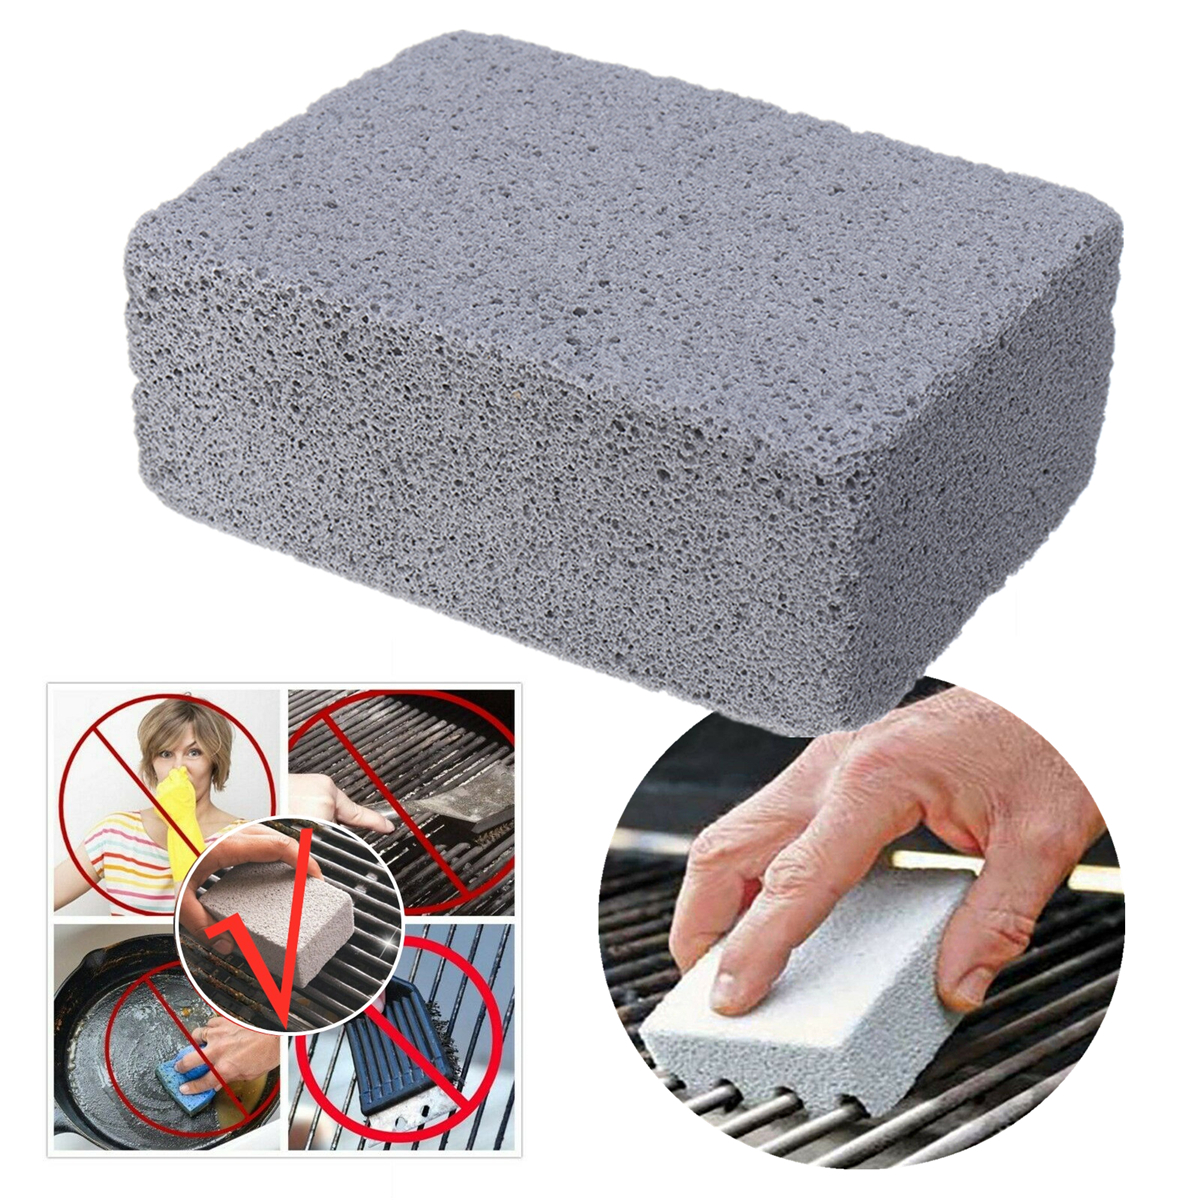 GriddleGrill-Cleaner-BBQ-Barbecue-Scraper-Griddle-Cleaning-Pumice-Stone-Brushes-1445352